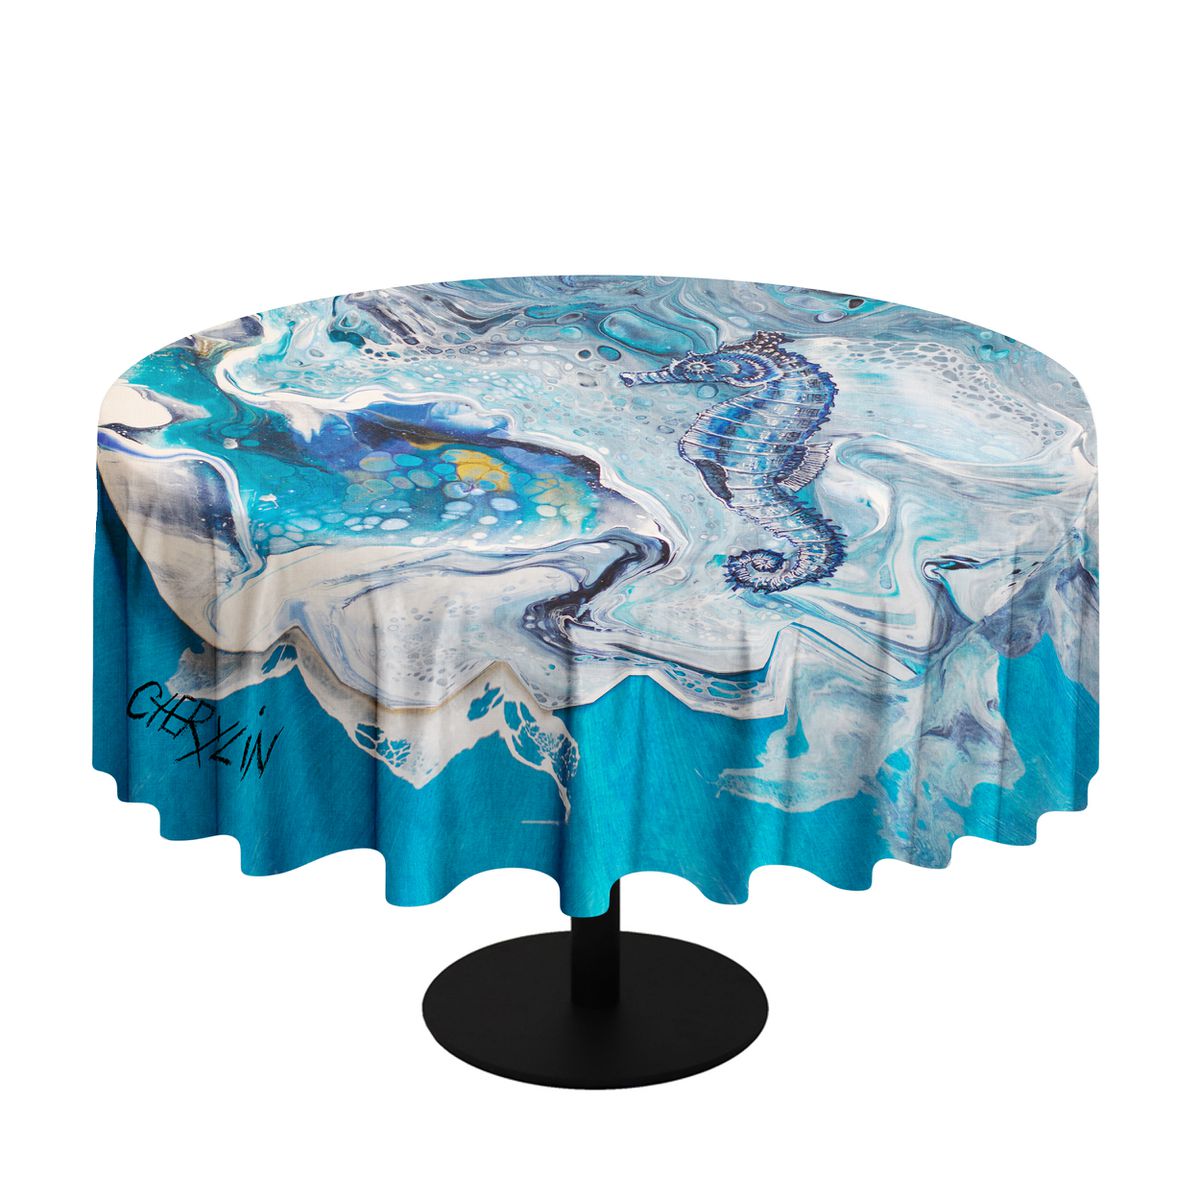 Crashing Waves Sea Horse By Cherylin Louw Round Tablecloth